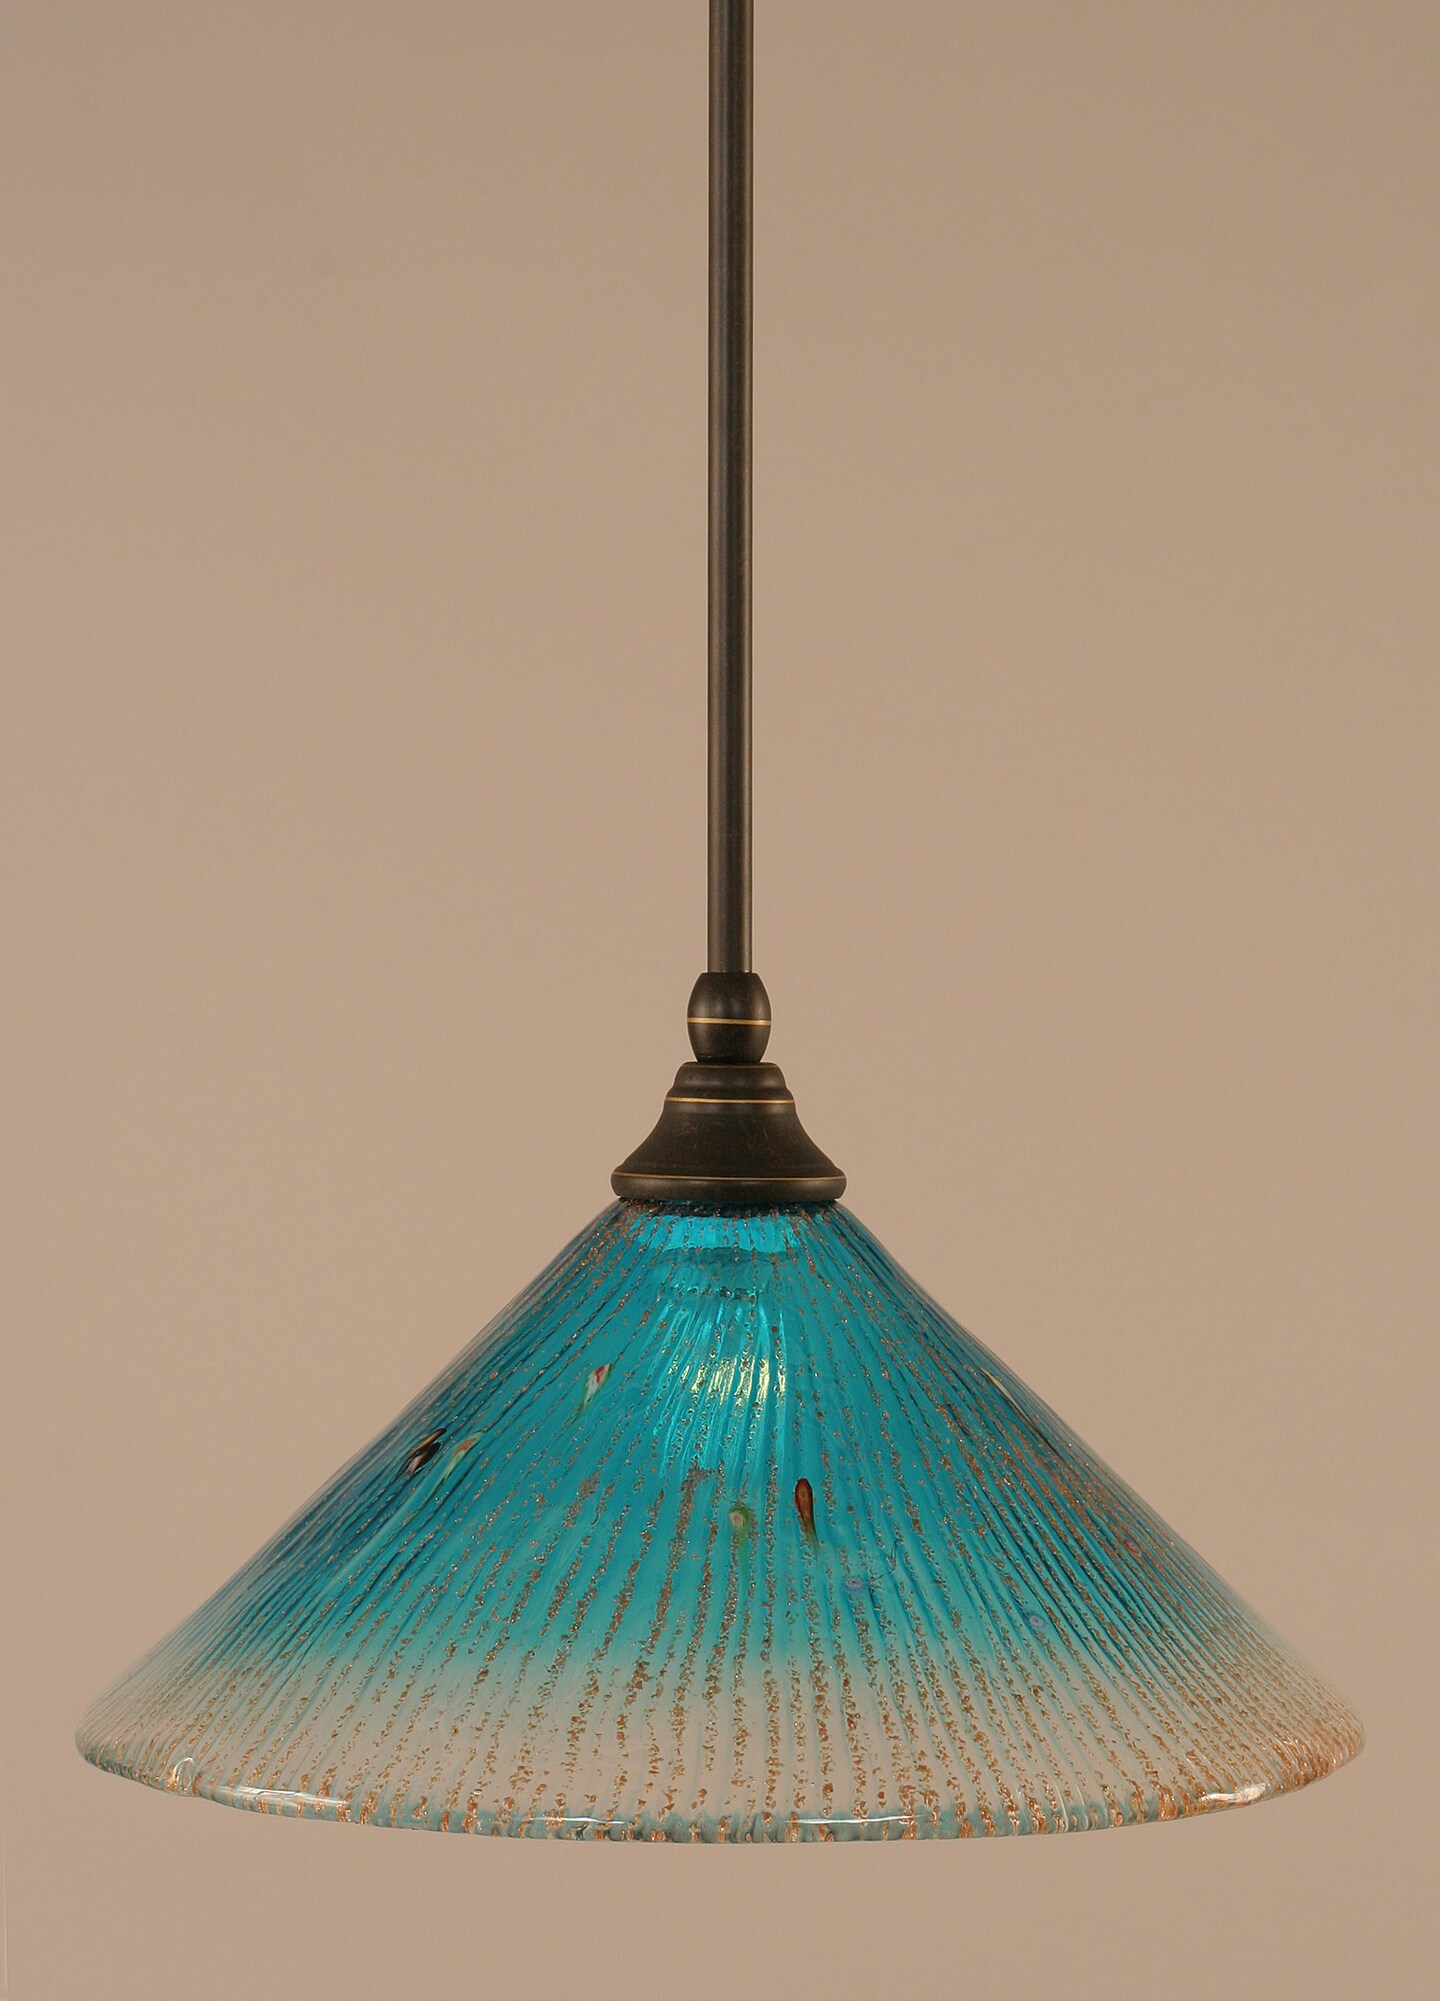 Stem Mini Pendant With Hang Straight Swivel Shown In Dark Granite Finish With 12 Teal Crystal Glass